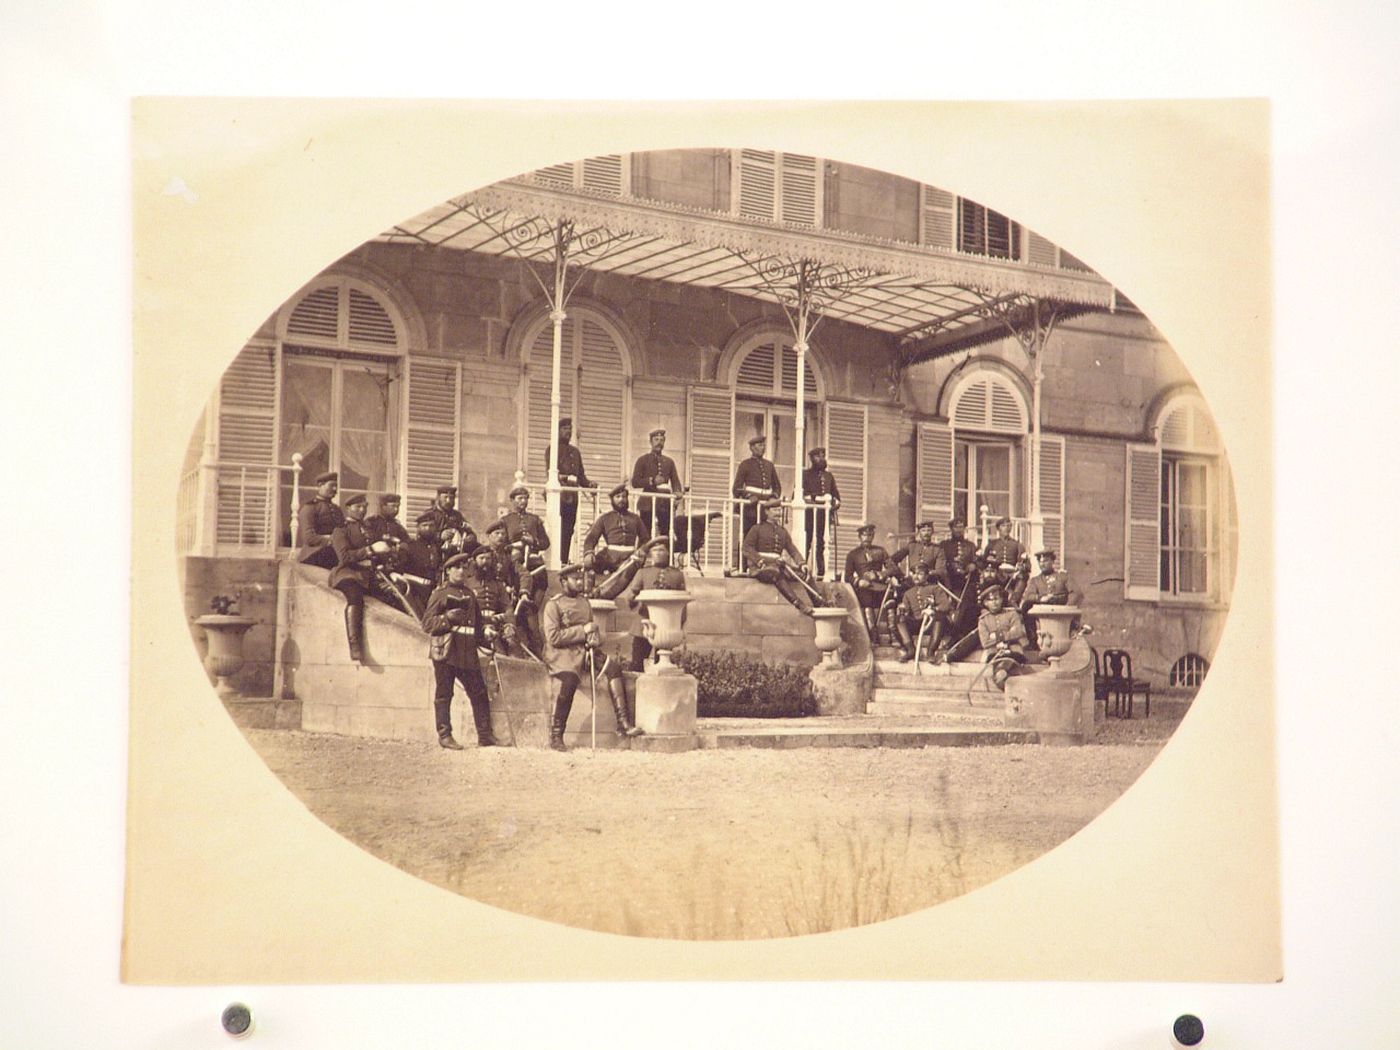 View of Prussian [?] soldiers sitting on the steps of Château Fitzjames [?], near Paris [?], France